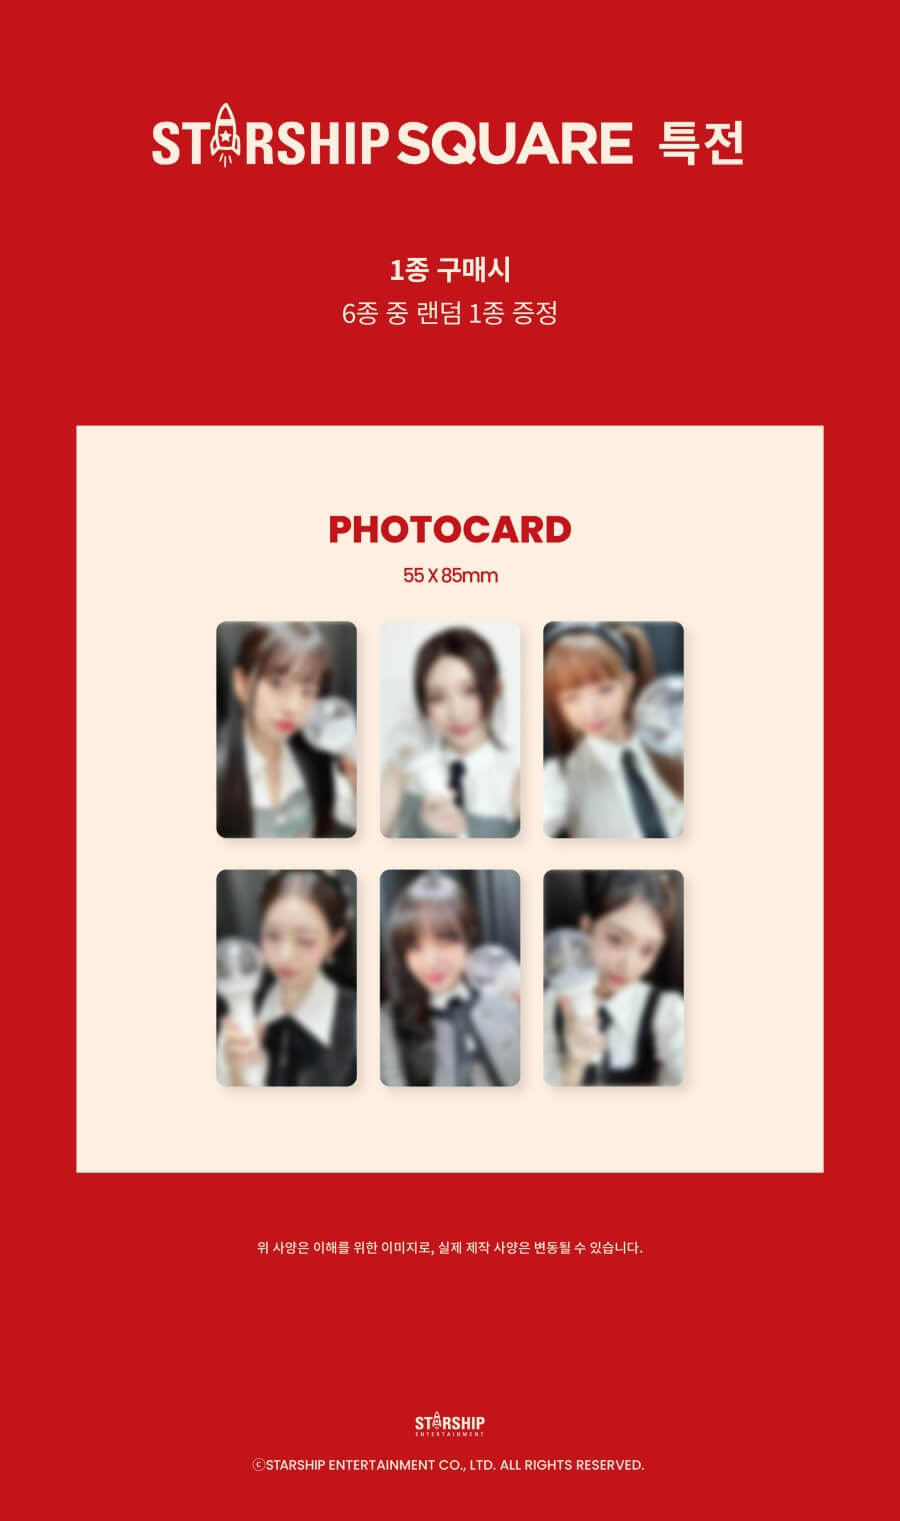 IVE THE FIRST FAN CONCERT The Prom Queens Blu-ray Inclusions Starship Square Benefit Photocard